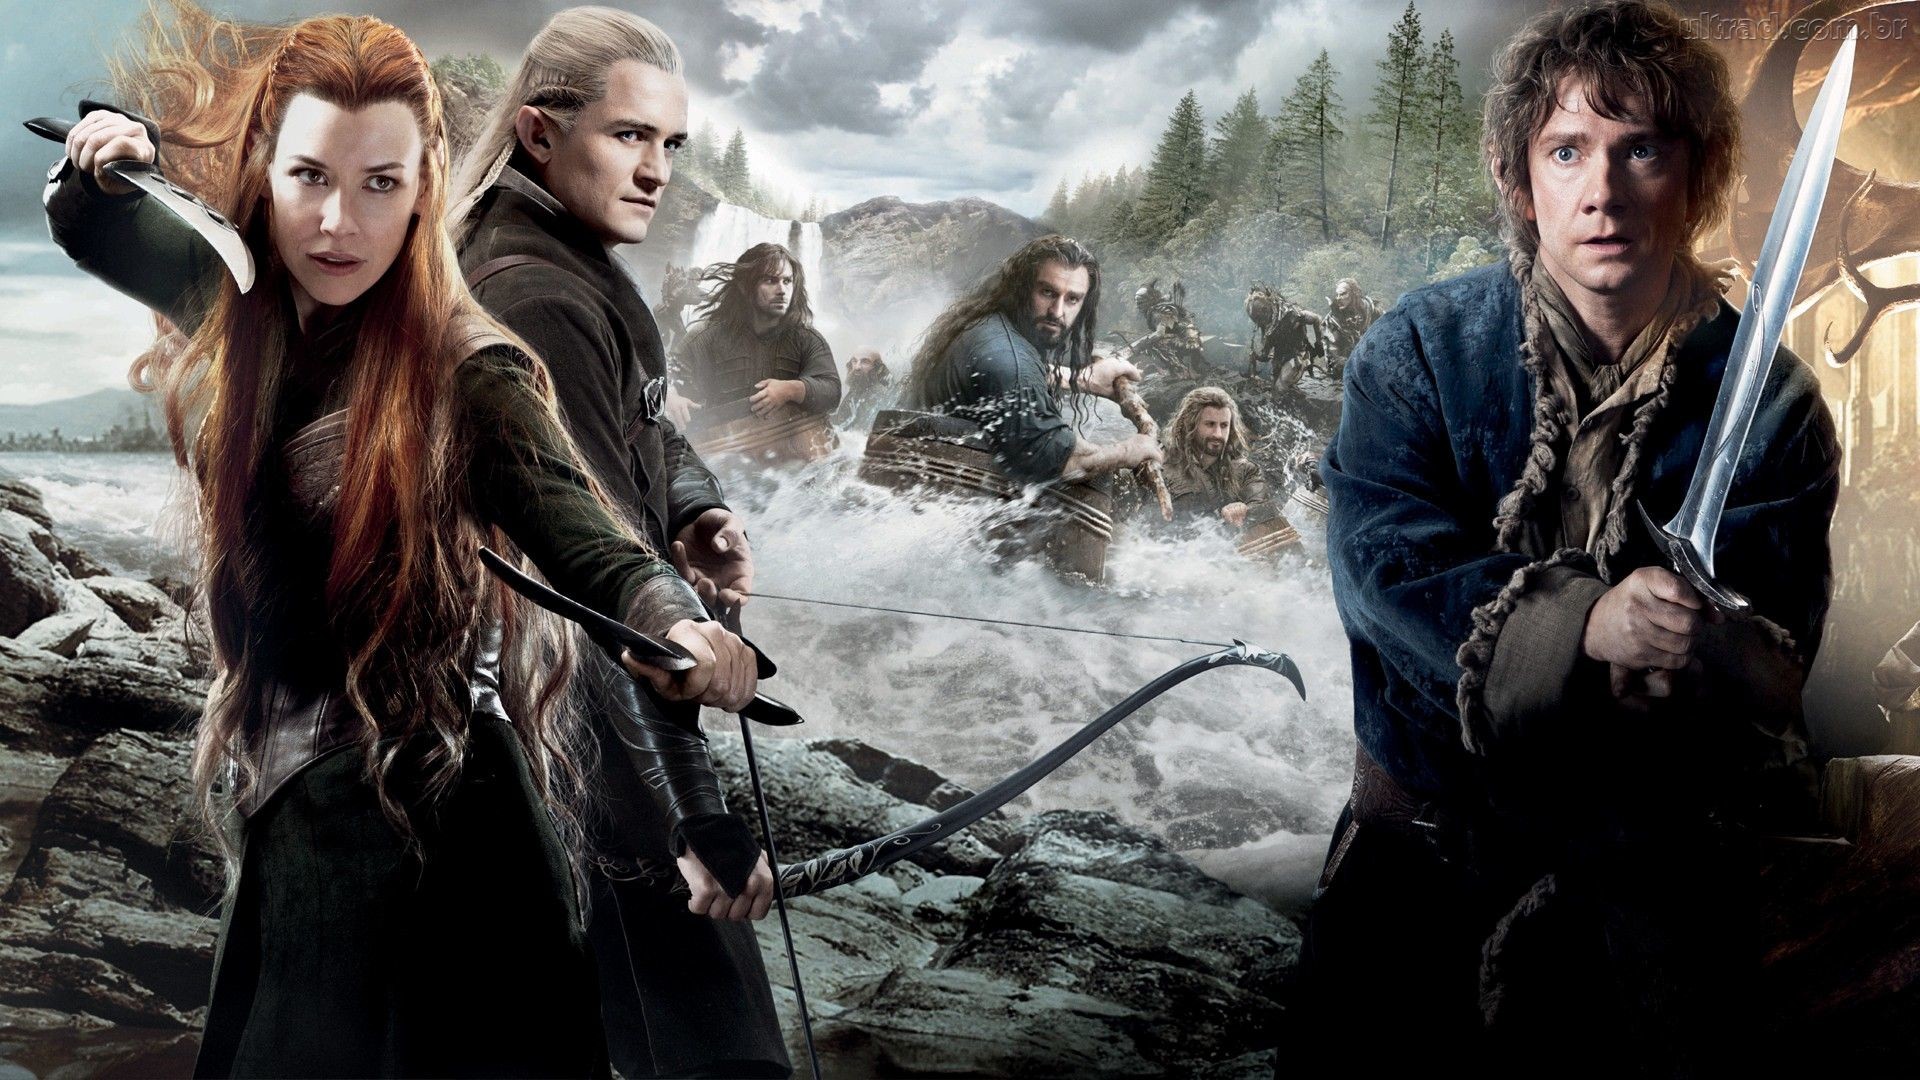 1920x1080 The Hobbit: The Battle Of The Five Armies Wallpapers hd